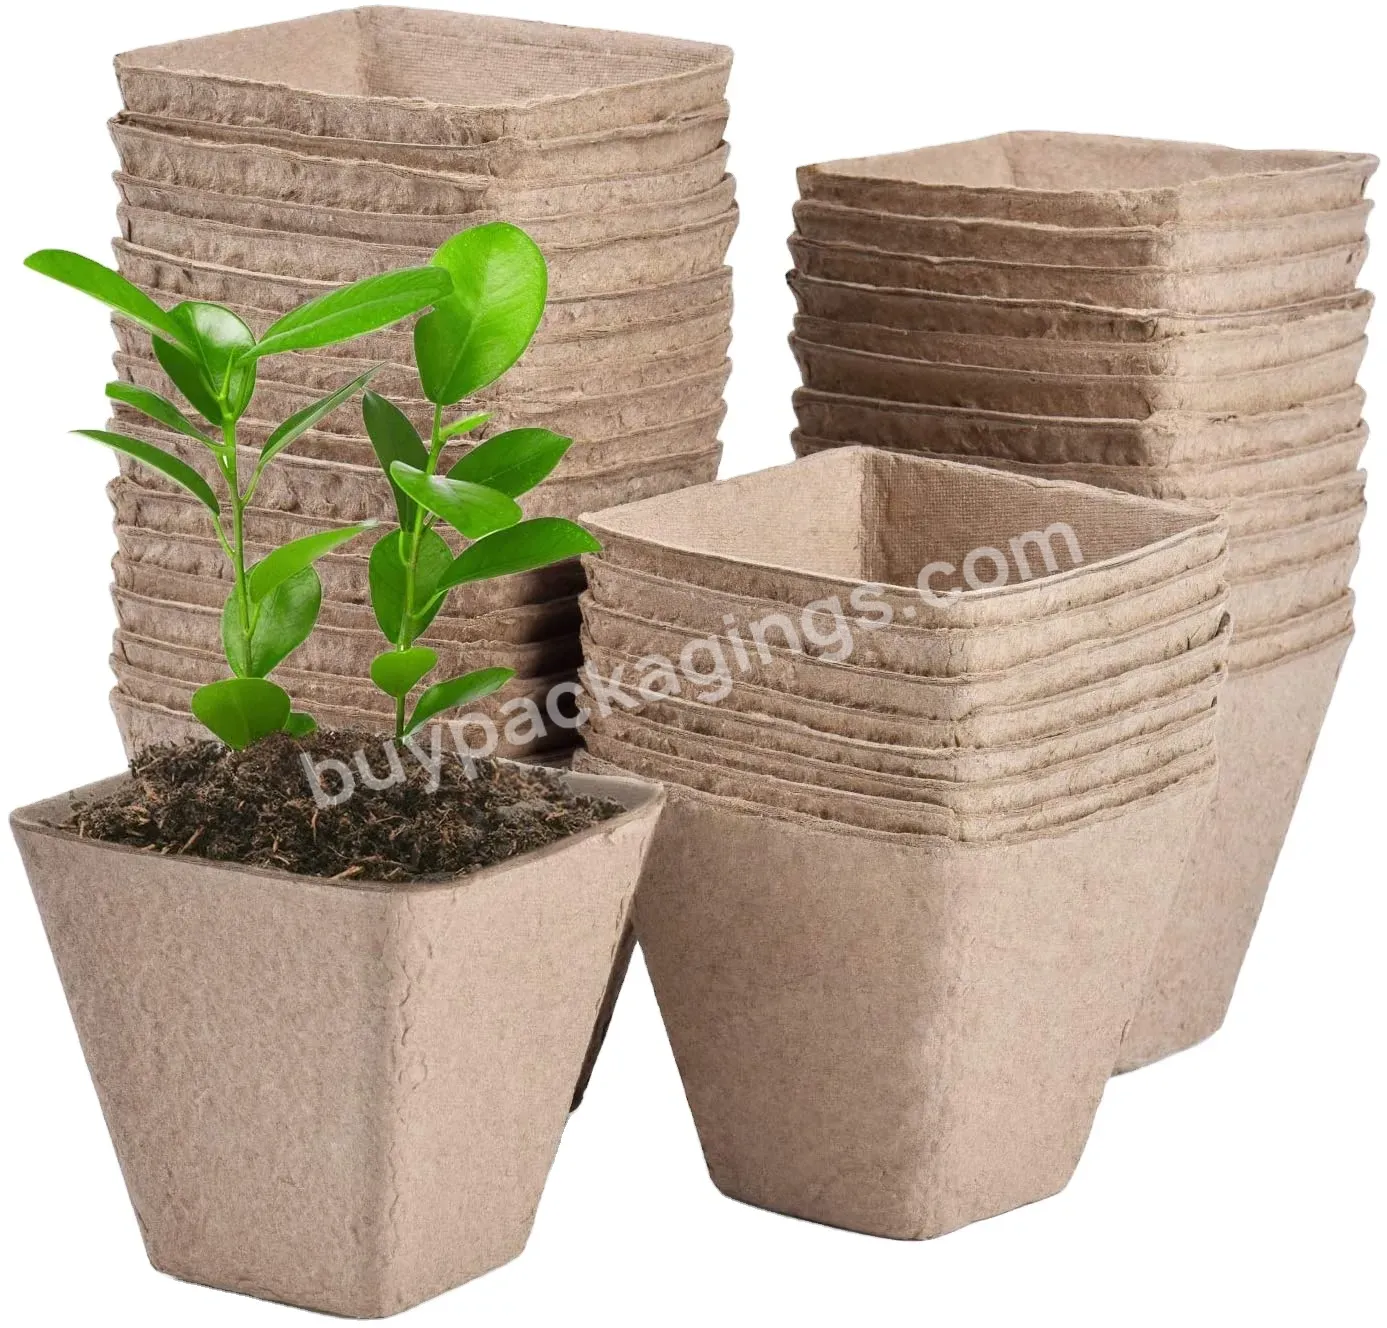 Customized Cheap Peat Pots For Seedlings Gardening Seed Starter Tray Biodegradable And Compostable Manufacturer Pot Seeds - Buy Seeding Pot,Garden Pot,Plants Pot.